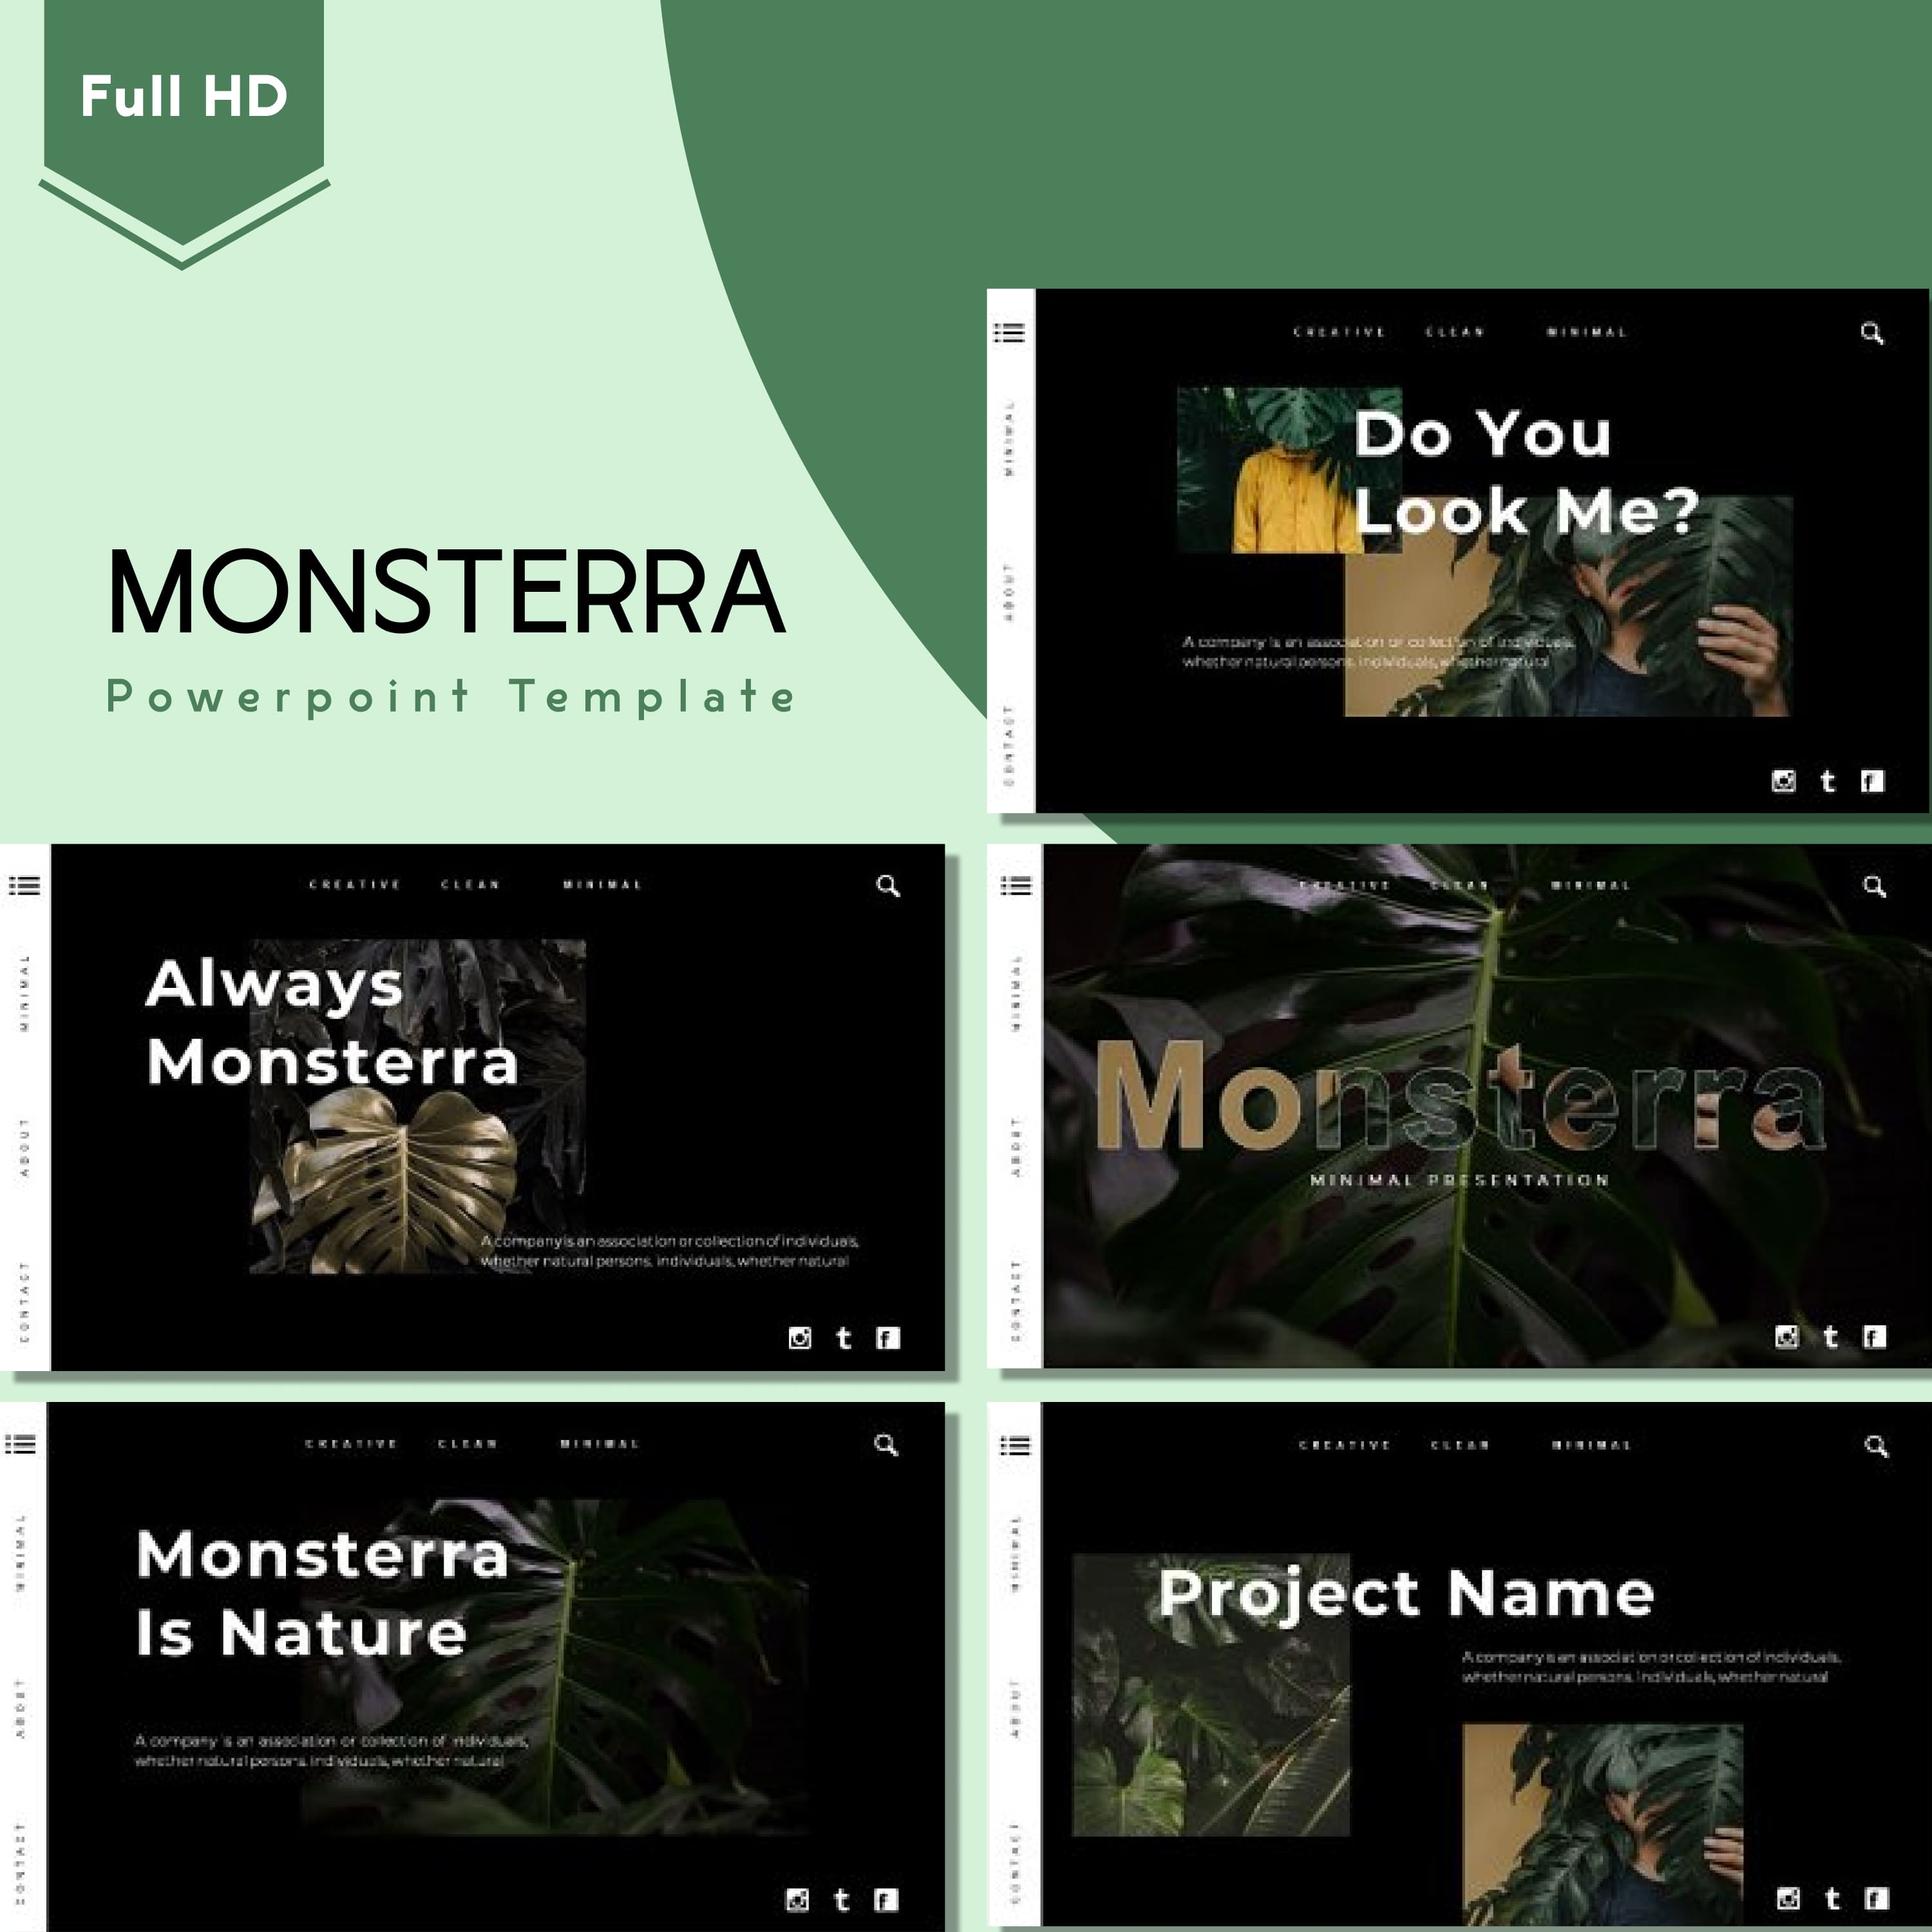 Monsterra powerpoint template - main image preview.